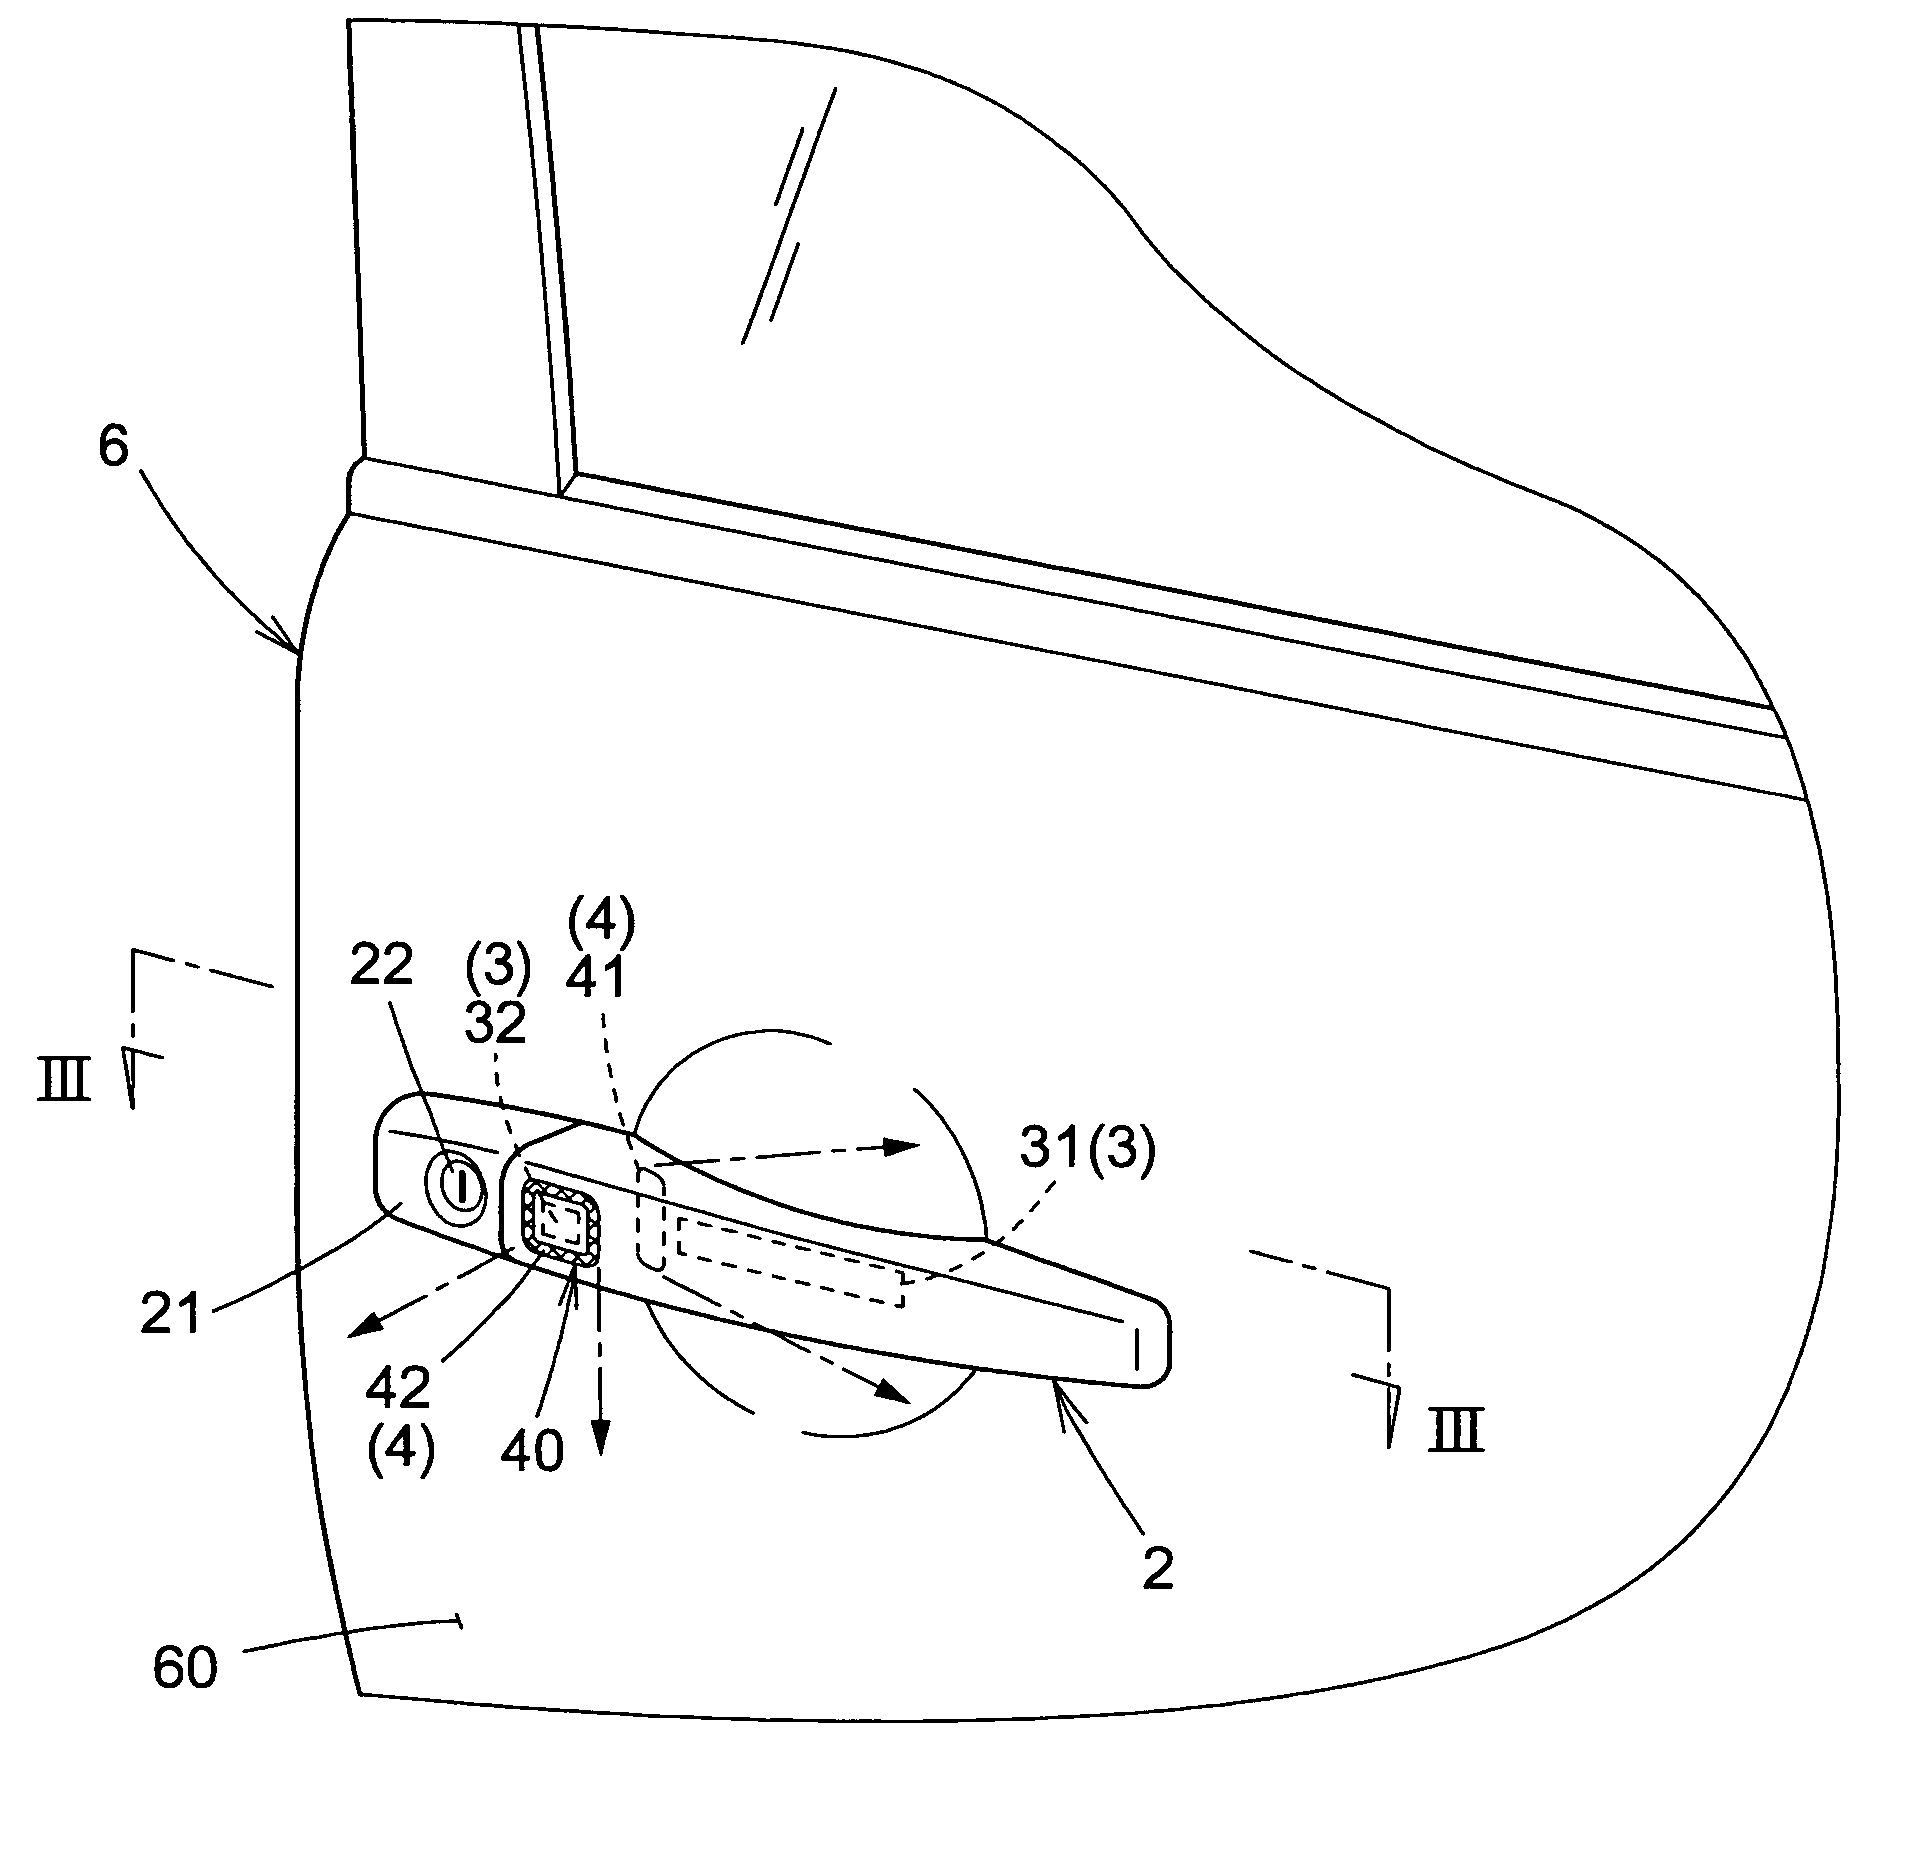 Apparatus for opening and closing vehicle door